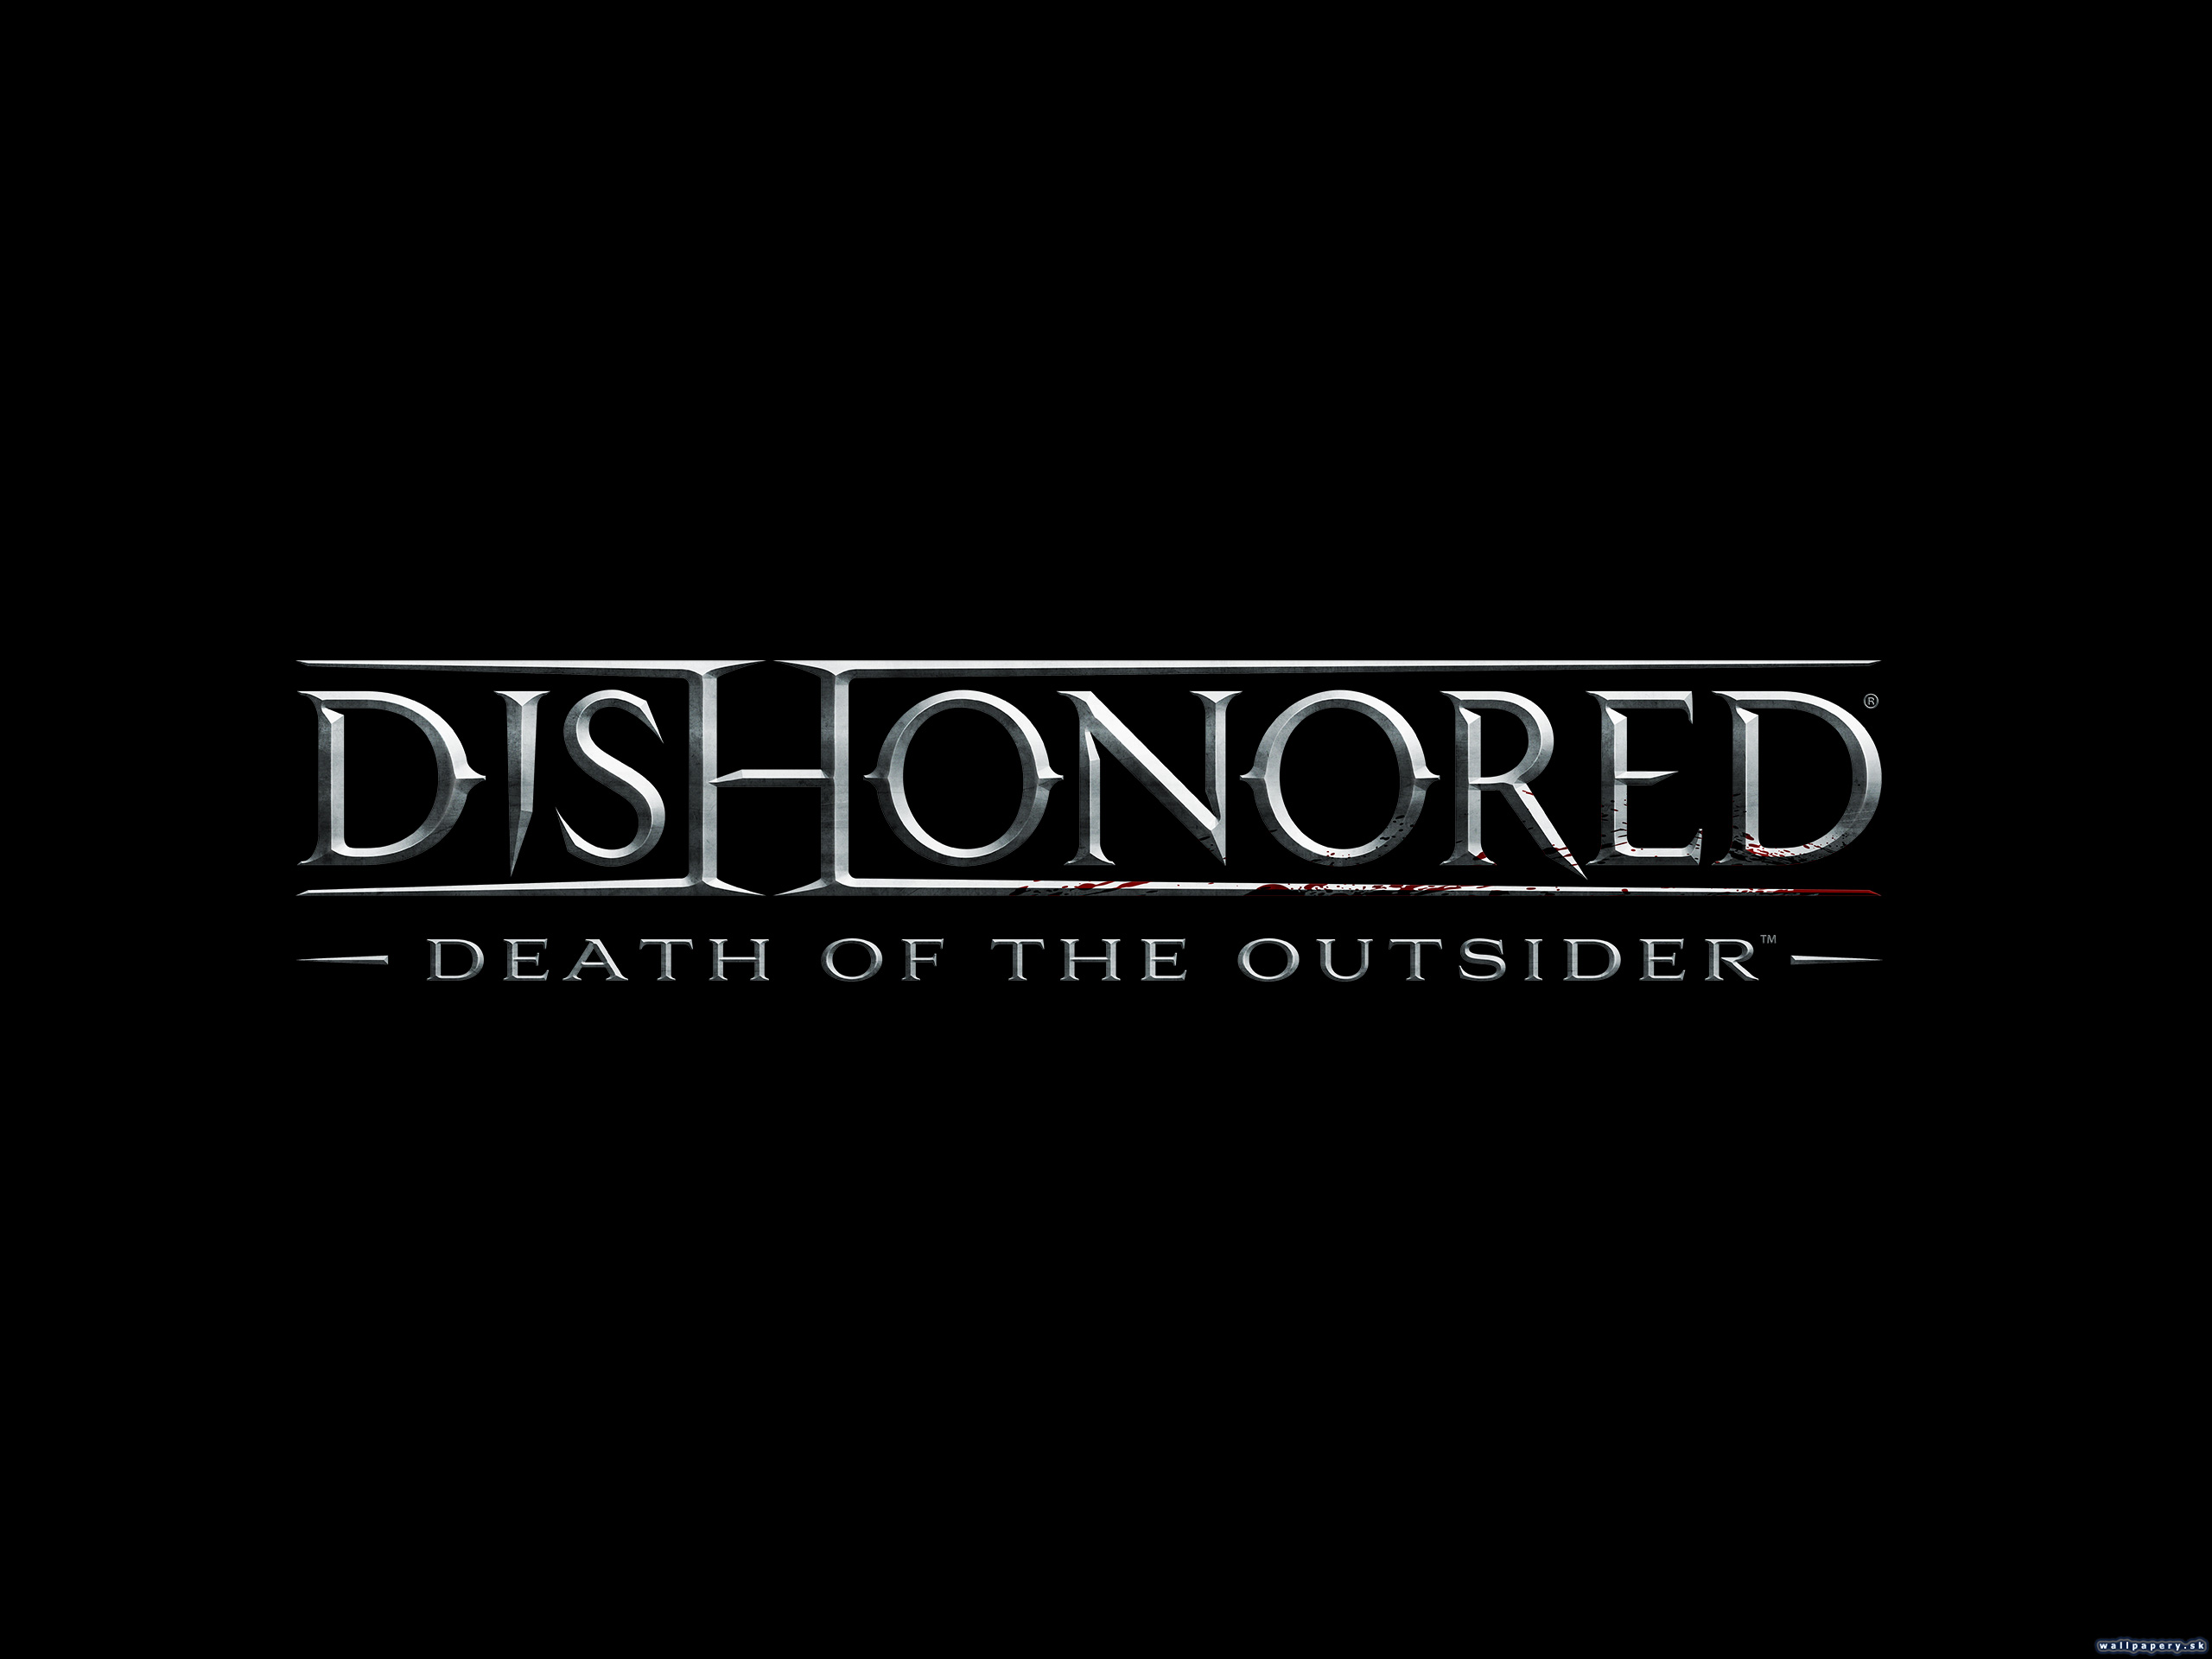 Dishonored: Death of the Outsider - wallpaper 2